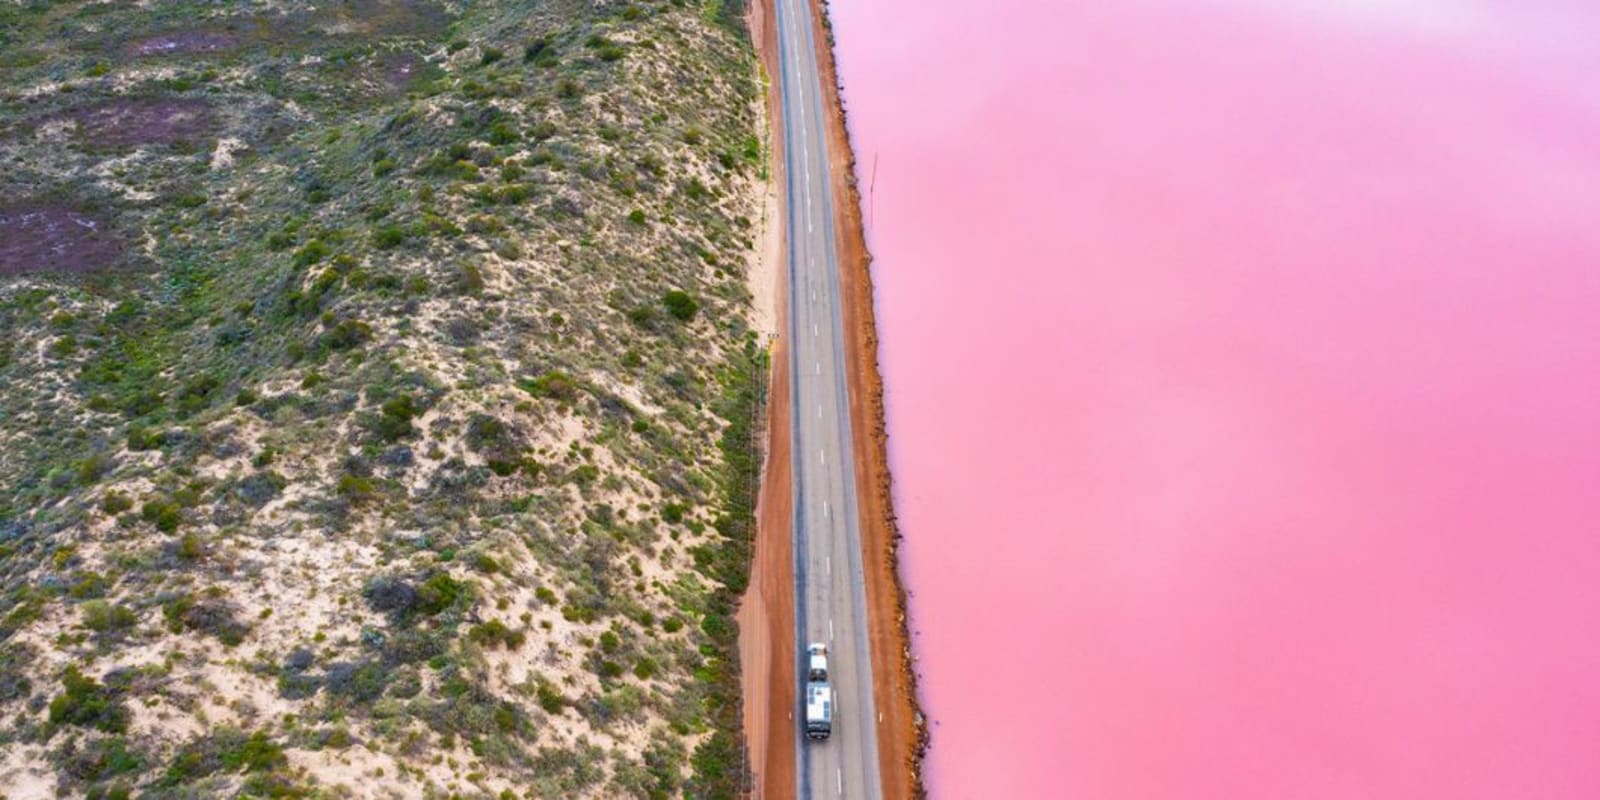 An aerial image of a car drive along a road past Hutt Lagoon which is a lovely pink colour